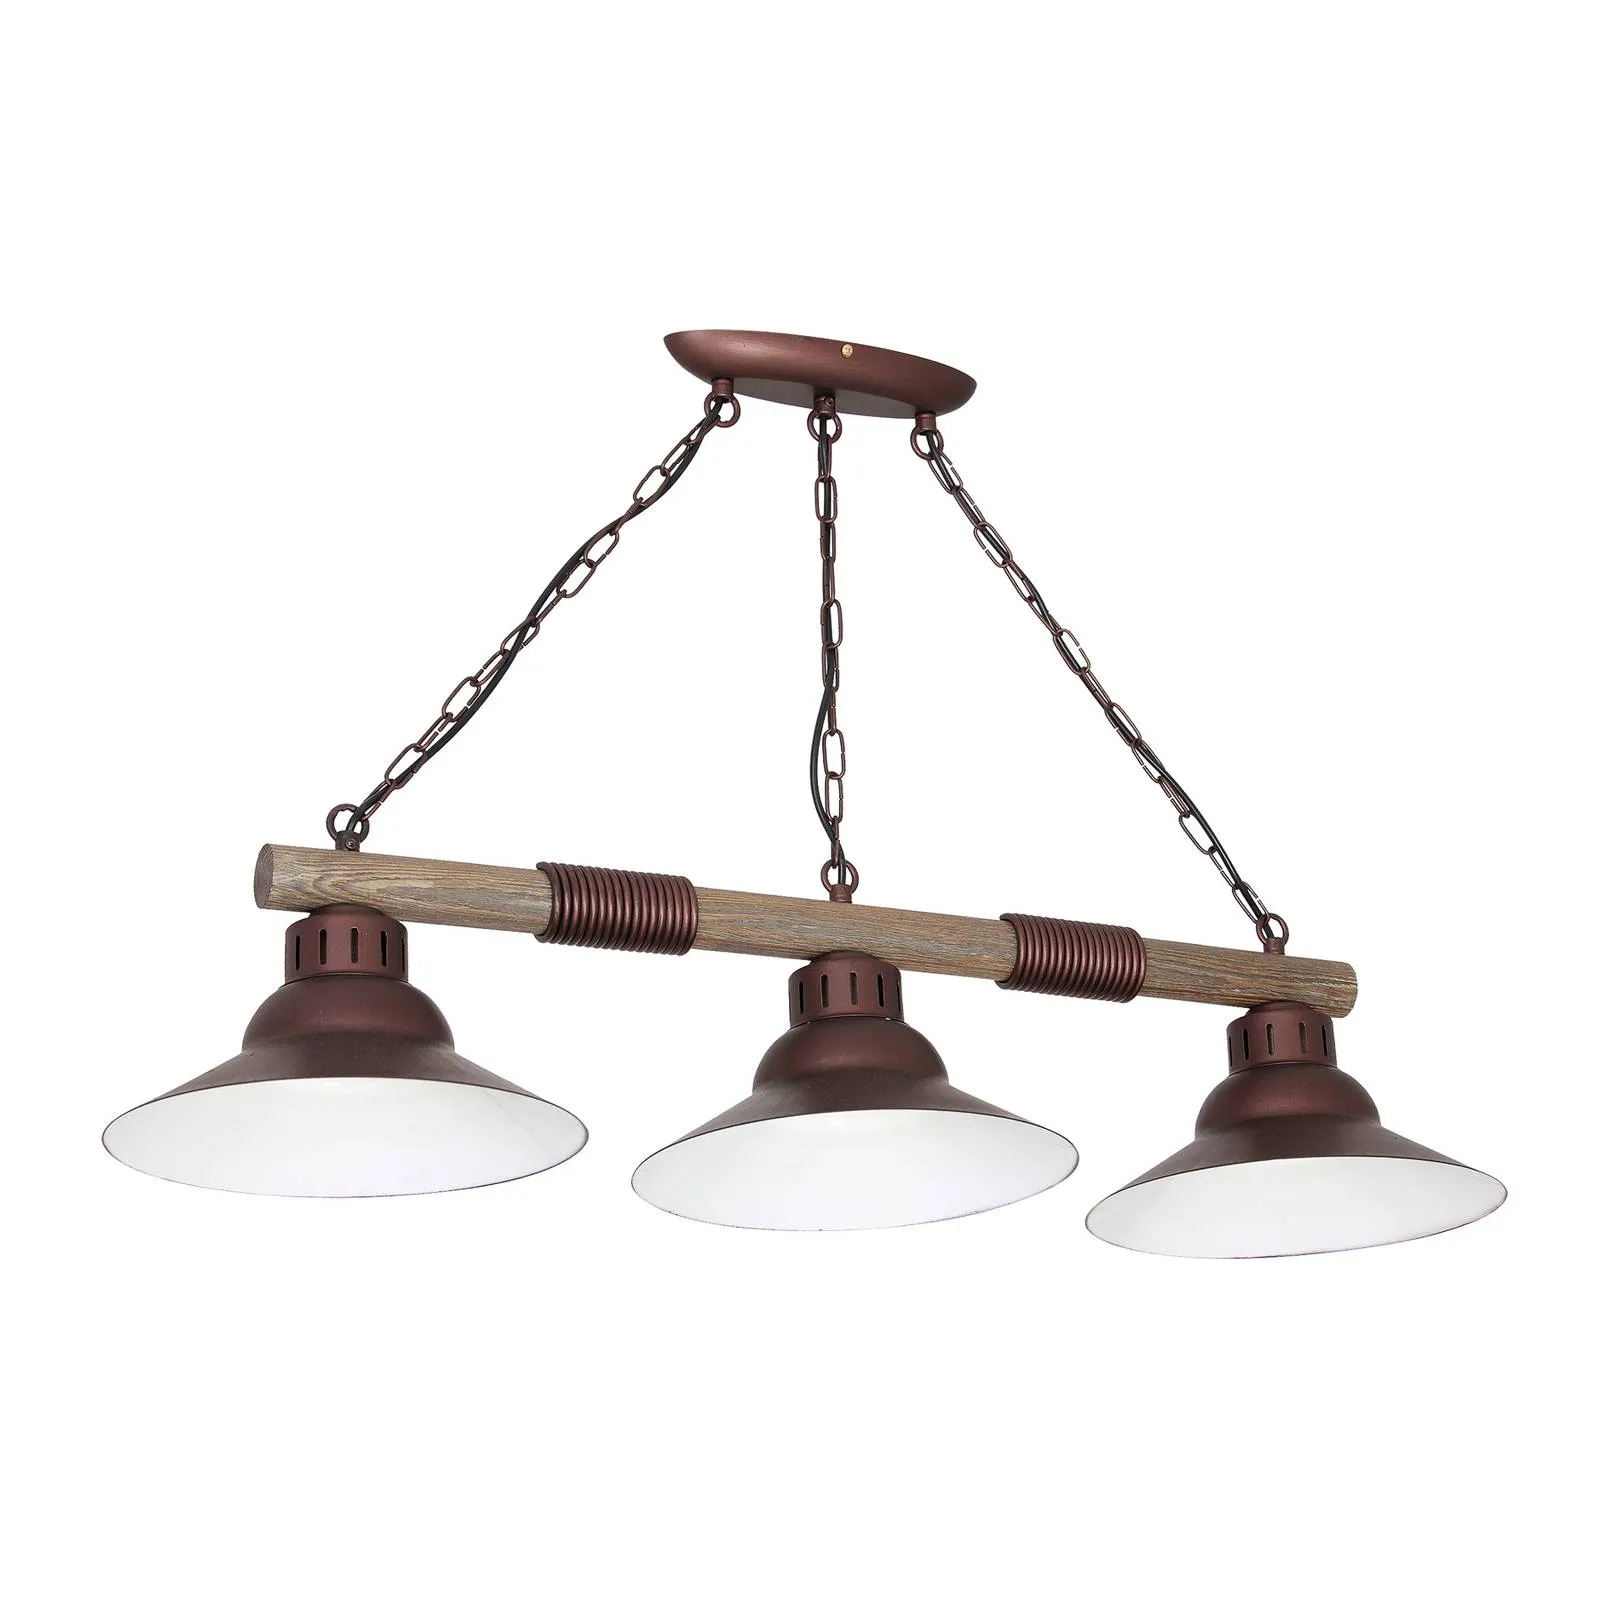 West hanging light, copper lampshades, three-bulb